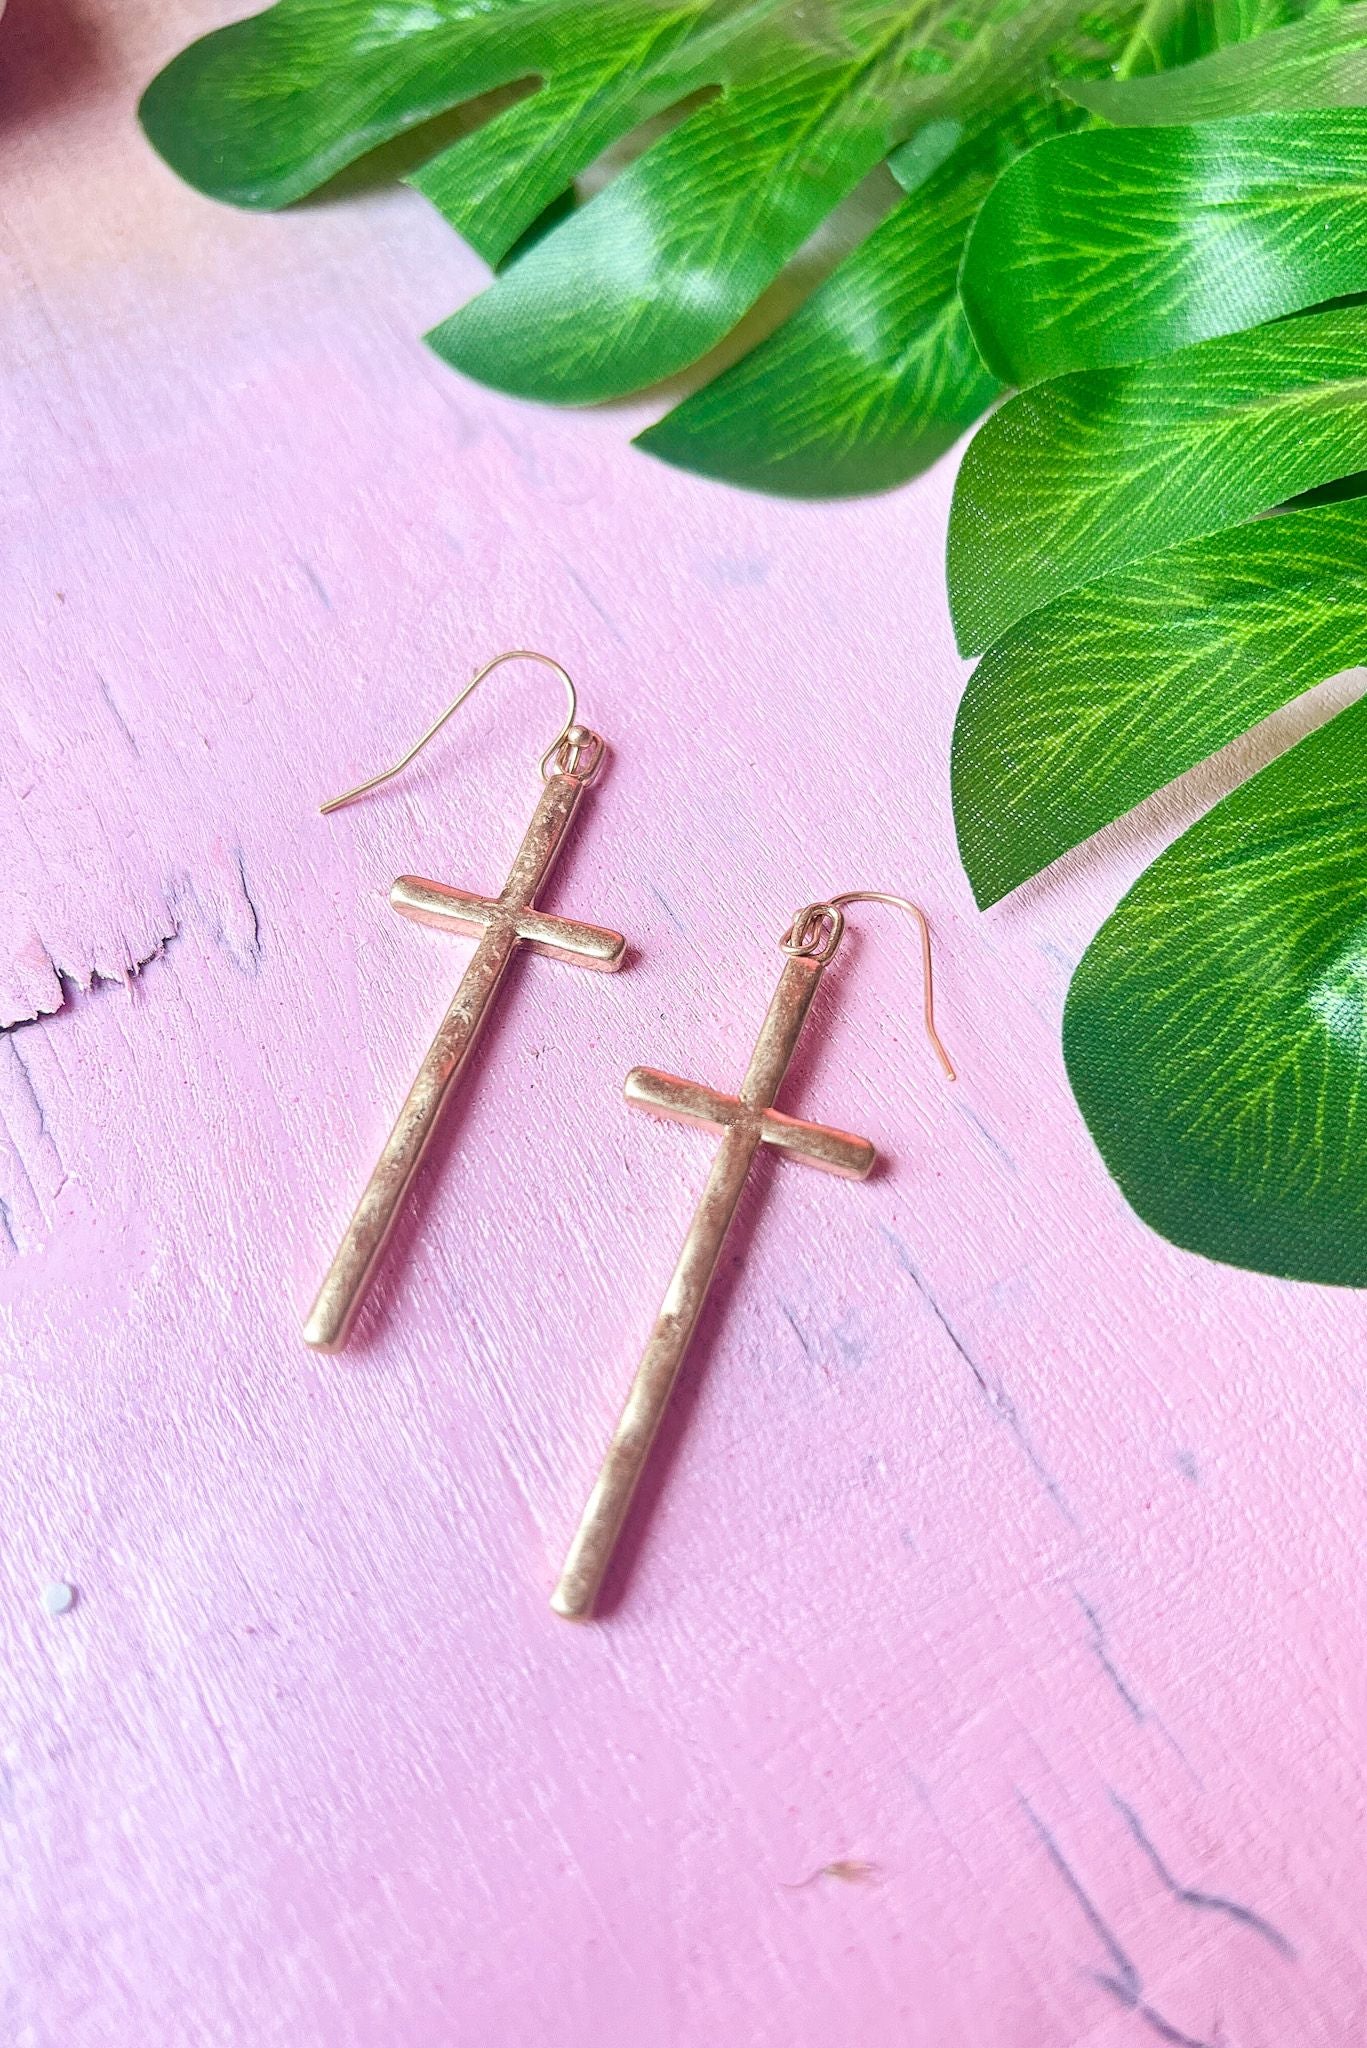 Gold Hammered Metal Cross Dangle Earrings, accessories, earrings, shop style your senses by mallory fitzsimmons